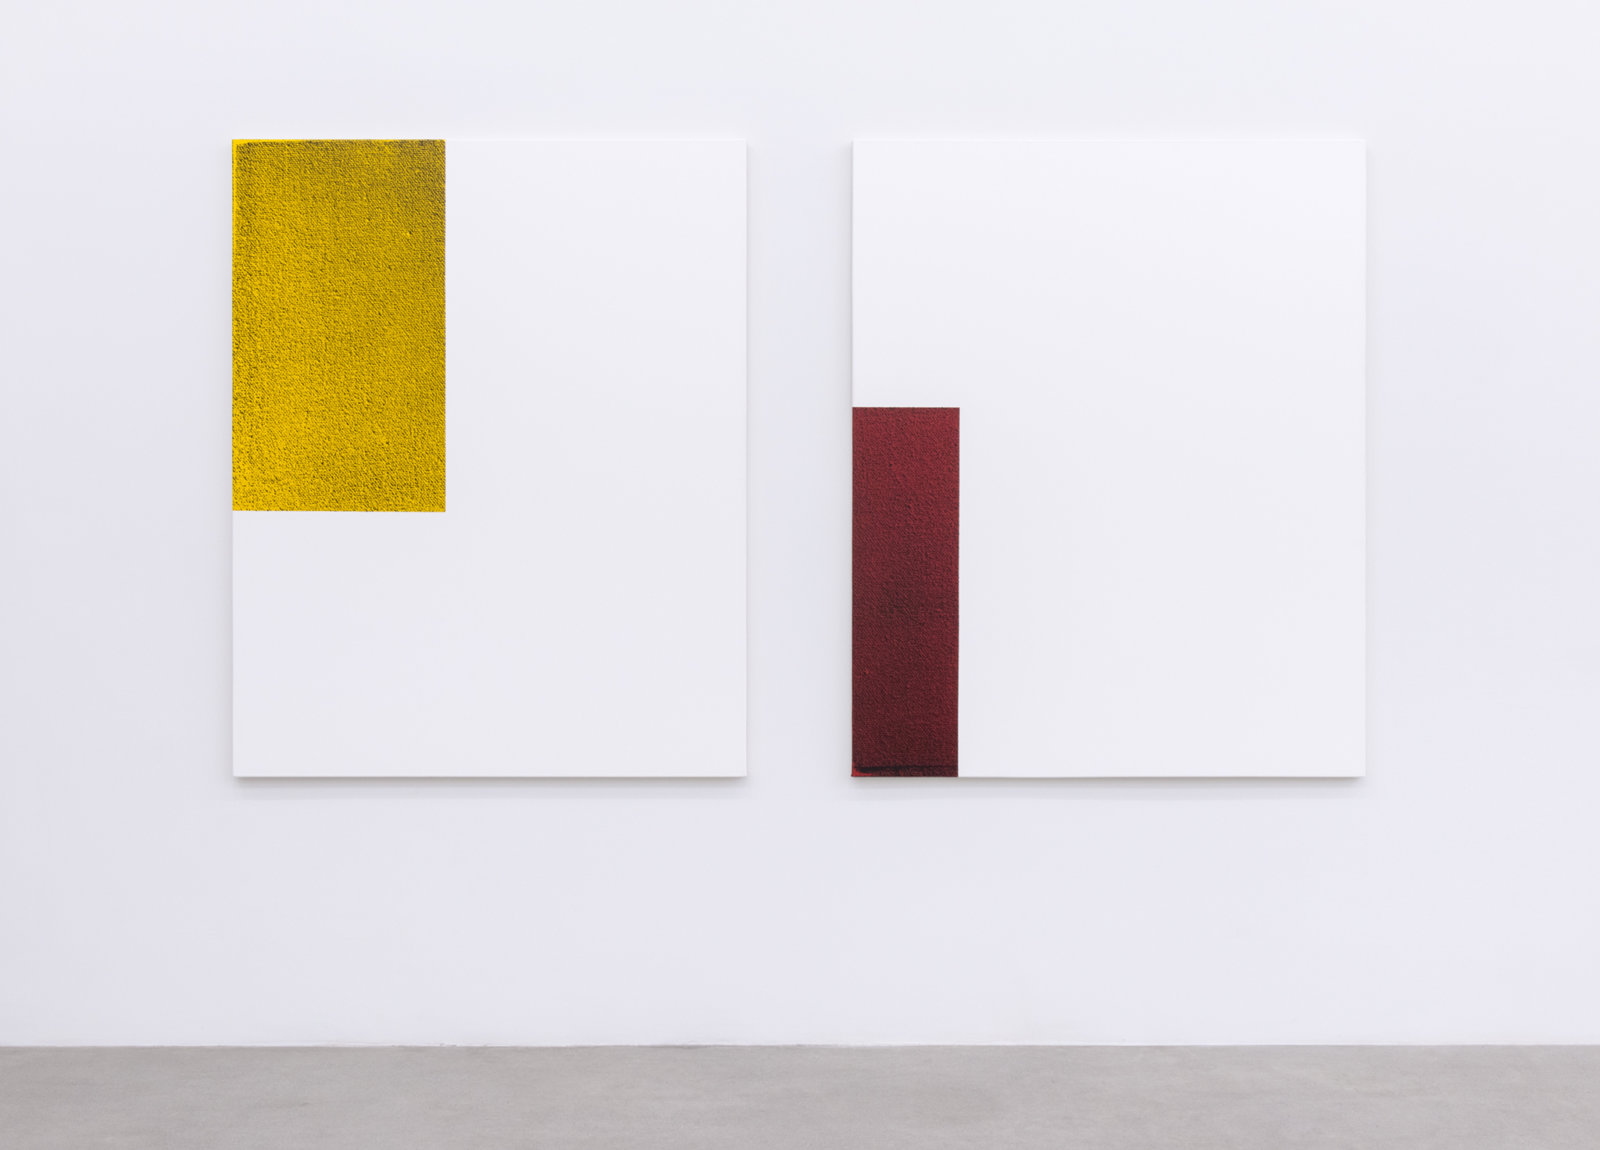 Ian Wallace, Untitled (Monochrome Structure II), 2014, diptych, silkscreen and acrylic on canvas, each 60 x 48 in. (153 x 122 cm)